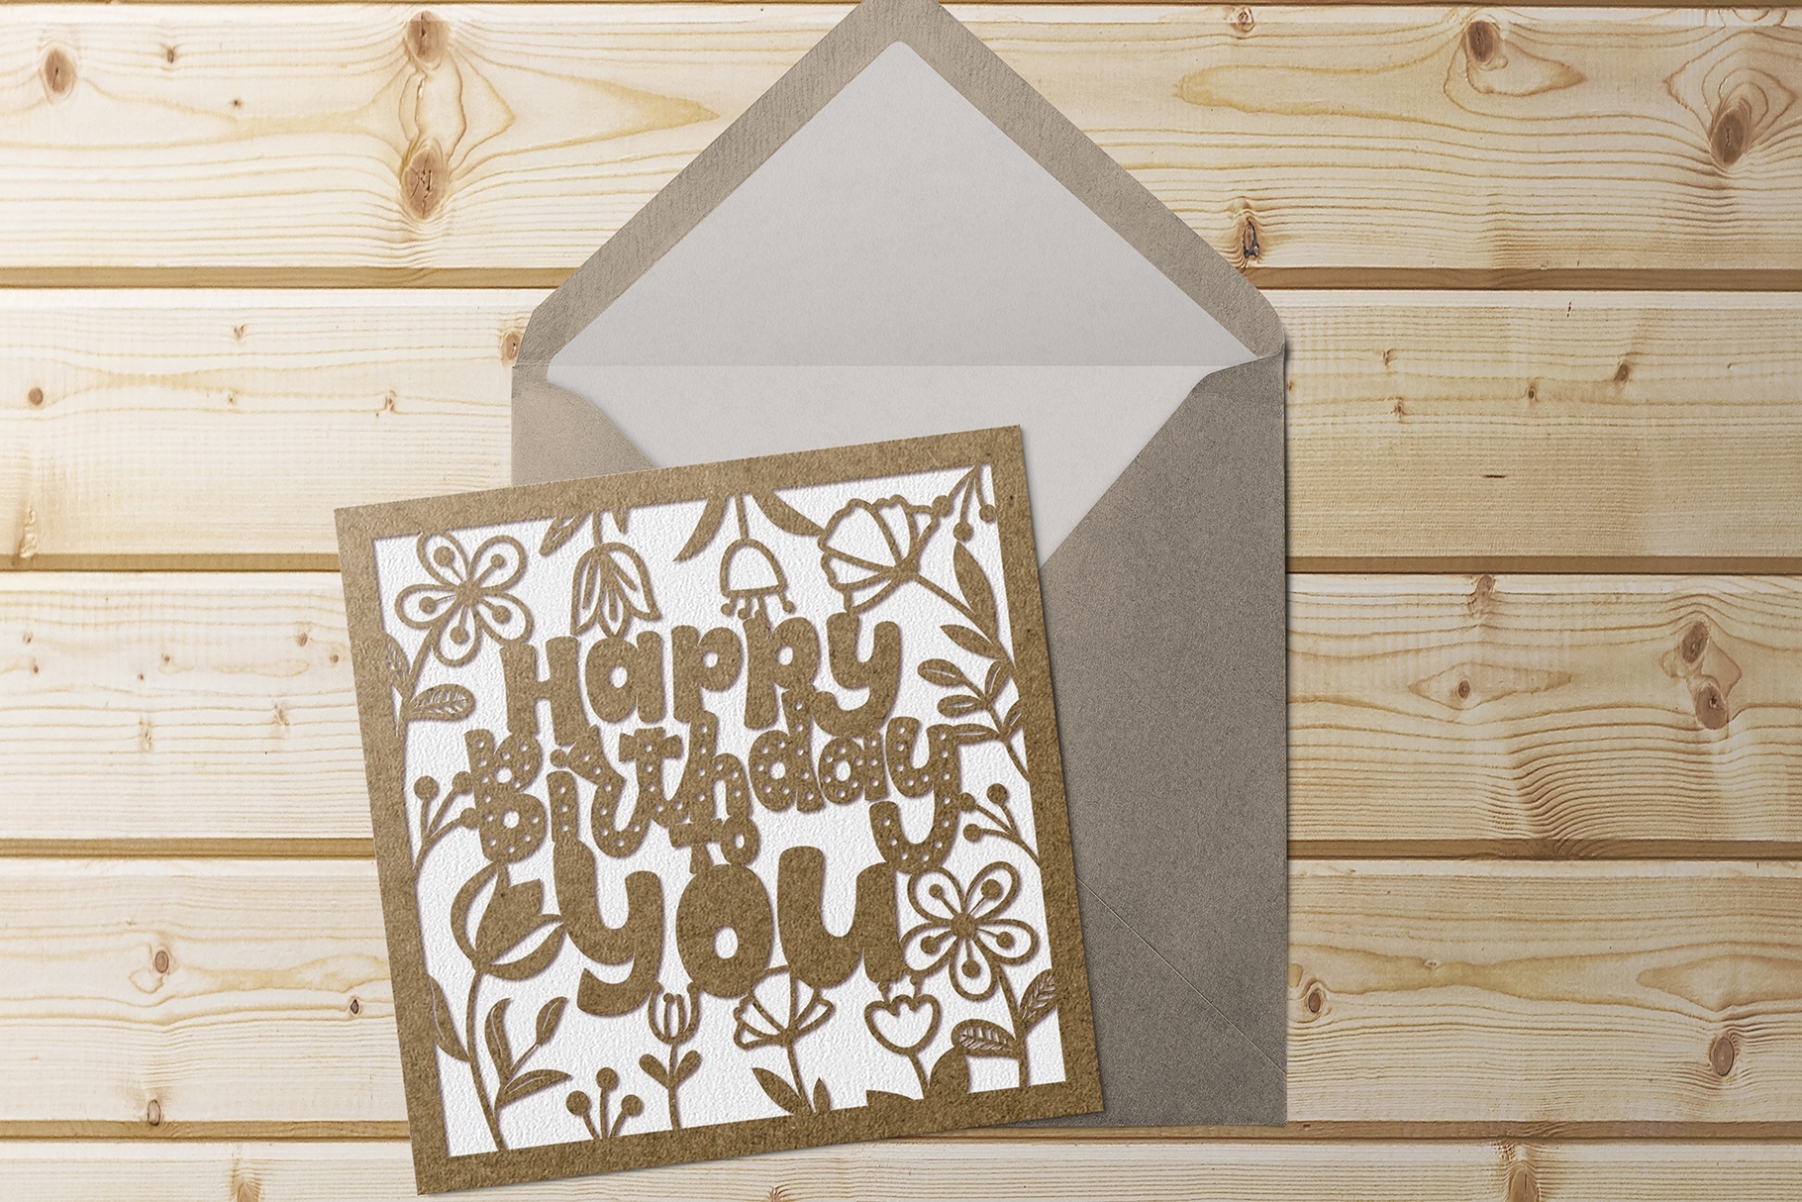 Svg Birthday Card Cut File For Cricut, Silhouette Cameo. (443138 Intended For Free Svg Card Templates